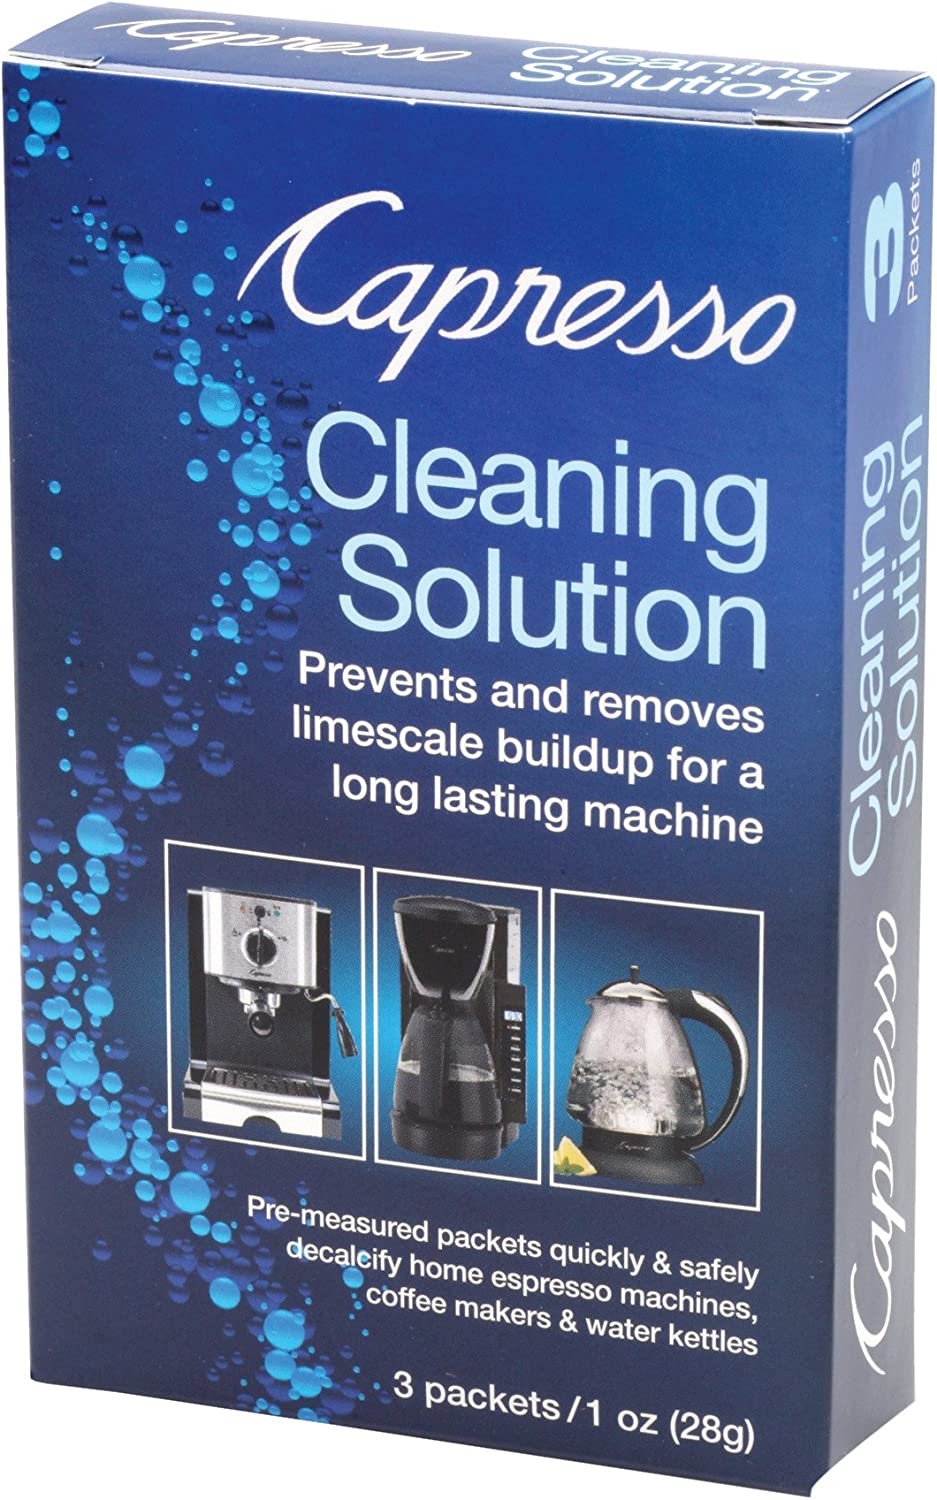 Capresso 640.13 Cleaning Solution 3 packets 1 oz (28g) (Packaging may vary),Blue,Small Import To Shop ×Product customization